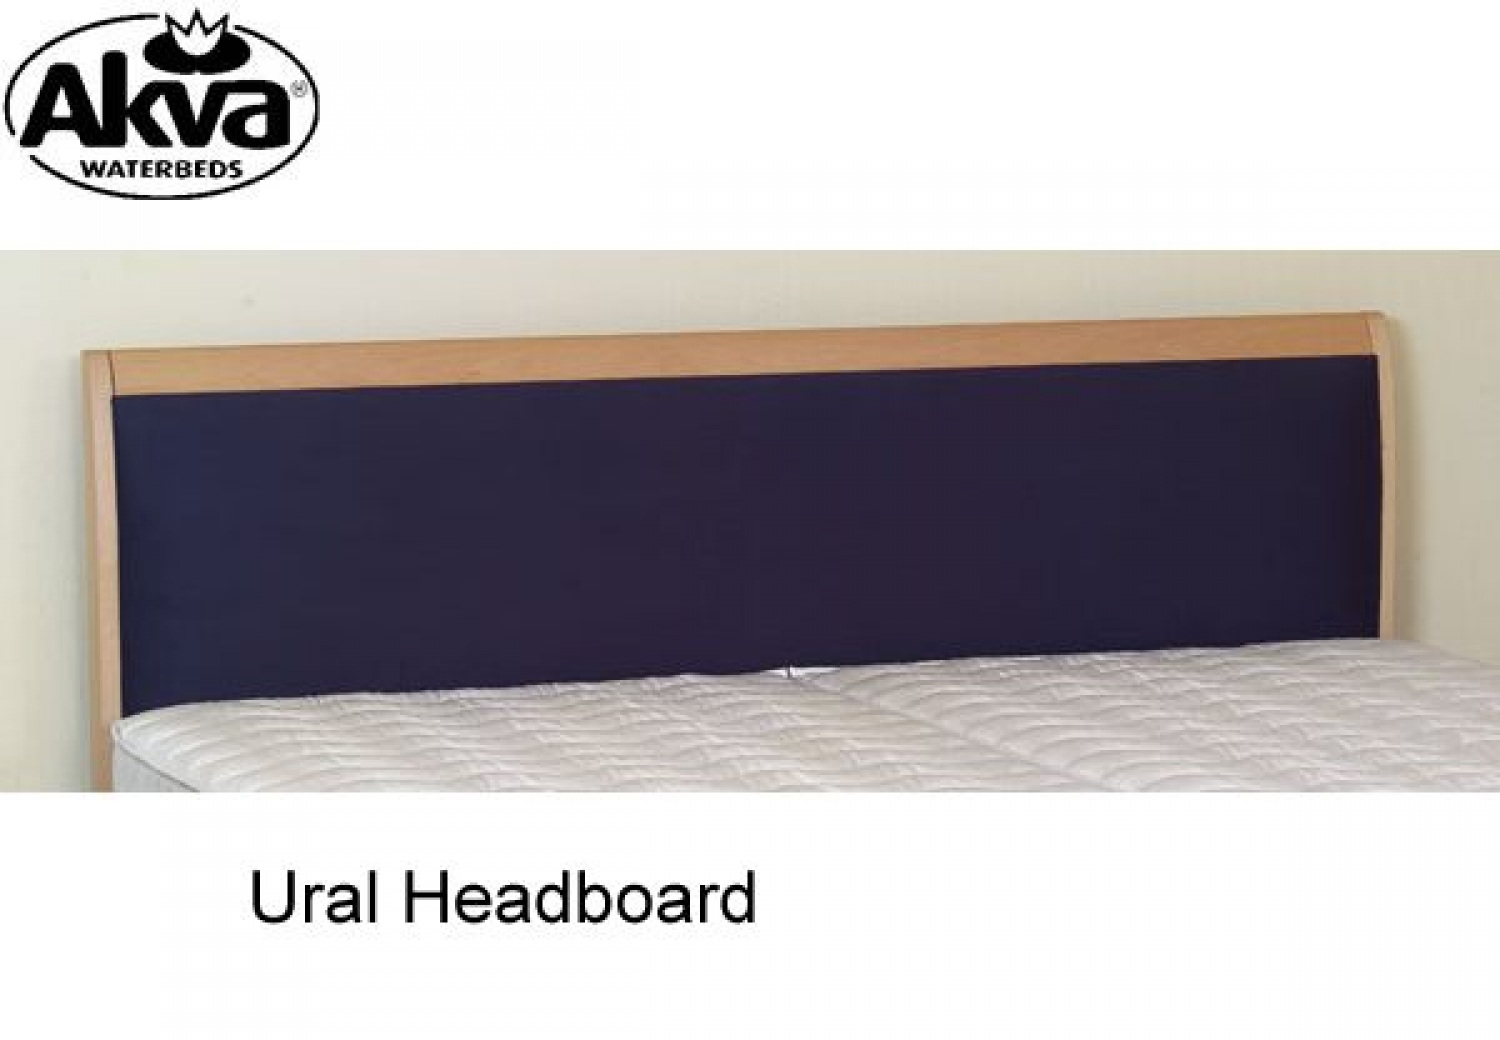 Akva Waterbed Ural Headboard has various fabric,leather and wood collection image